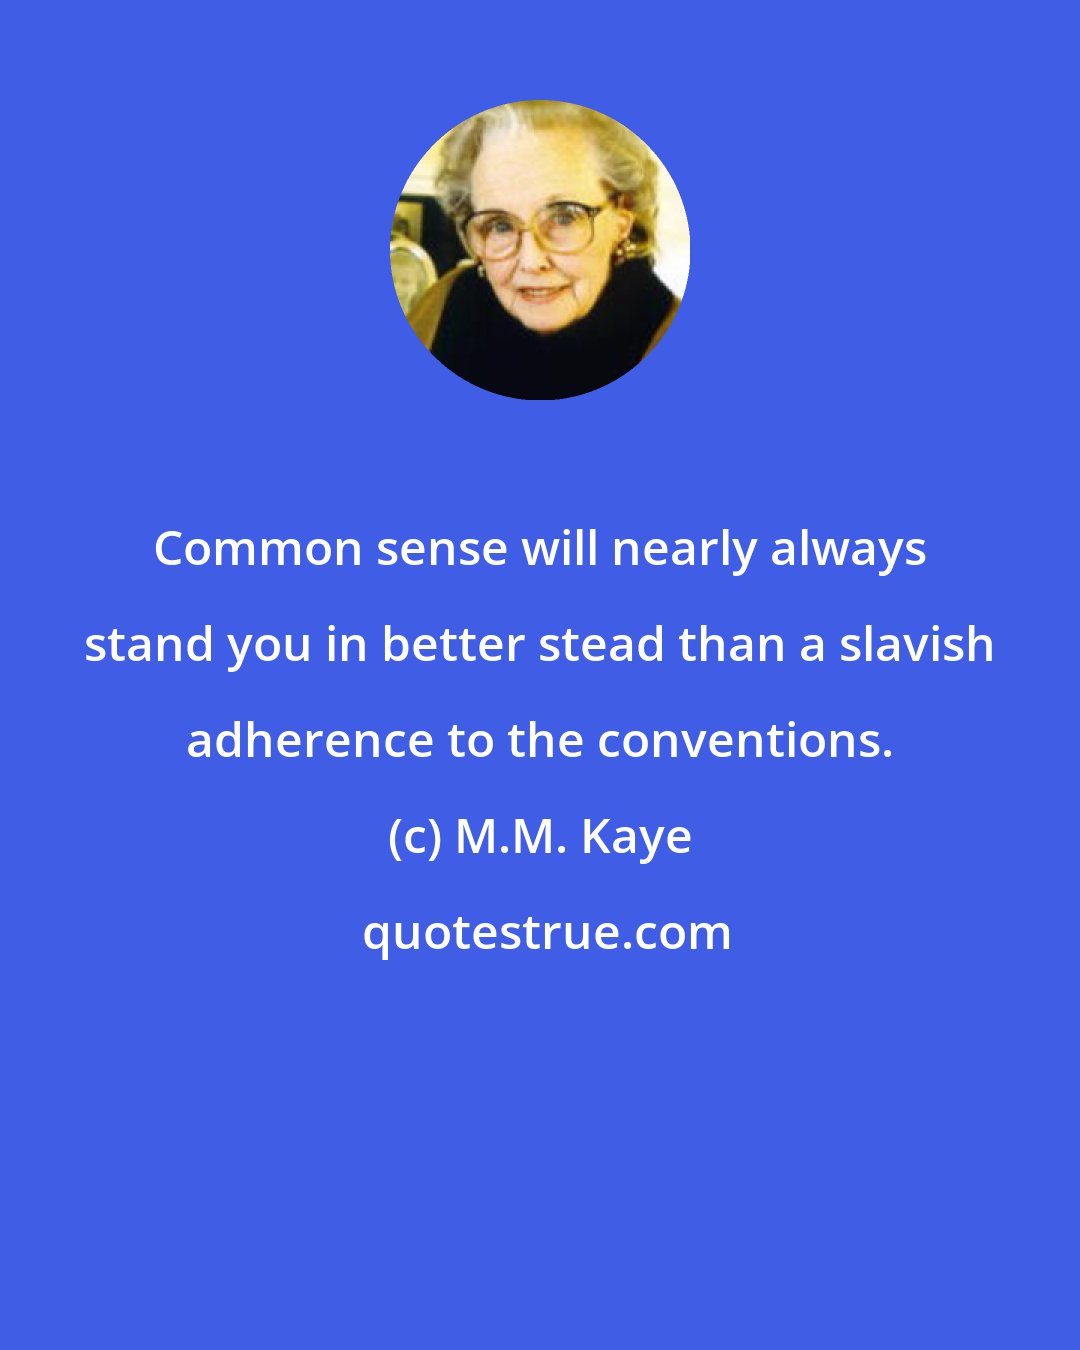 M.M. Kaye: Common sense will nearly always stand you in better stead than a slavish adherence to the conventions.